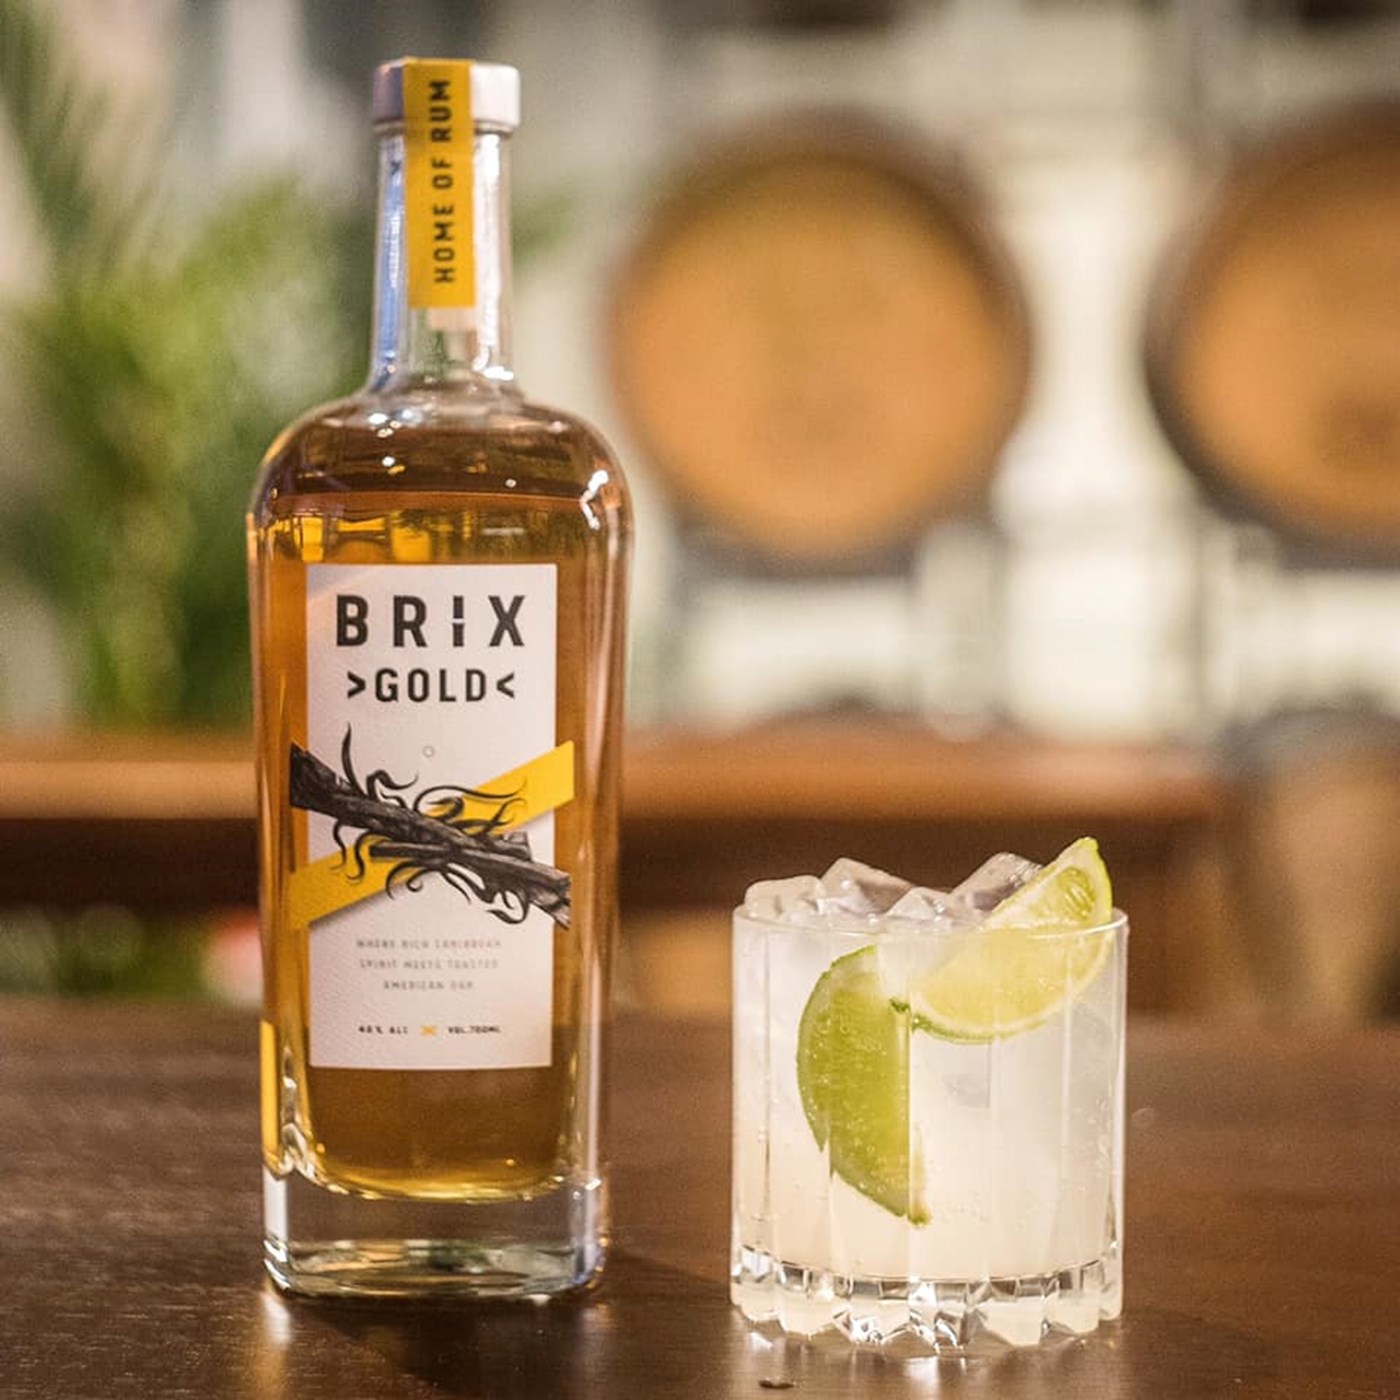 A bottle of Gold Rum from Brix Distillers next to a cocktail on a wooden bench, set against a blurred background 